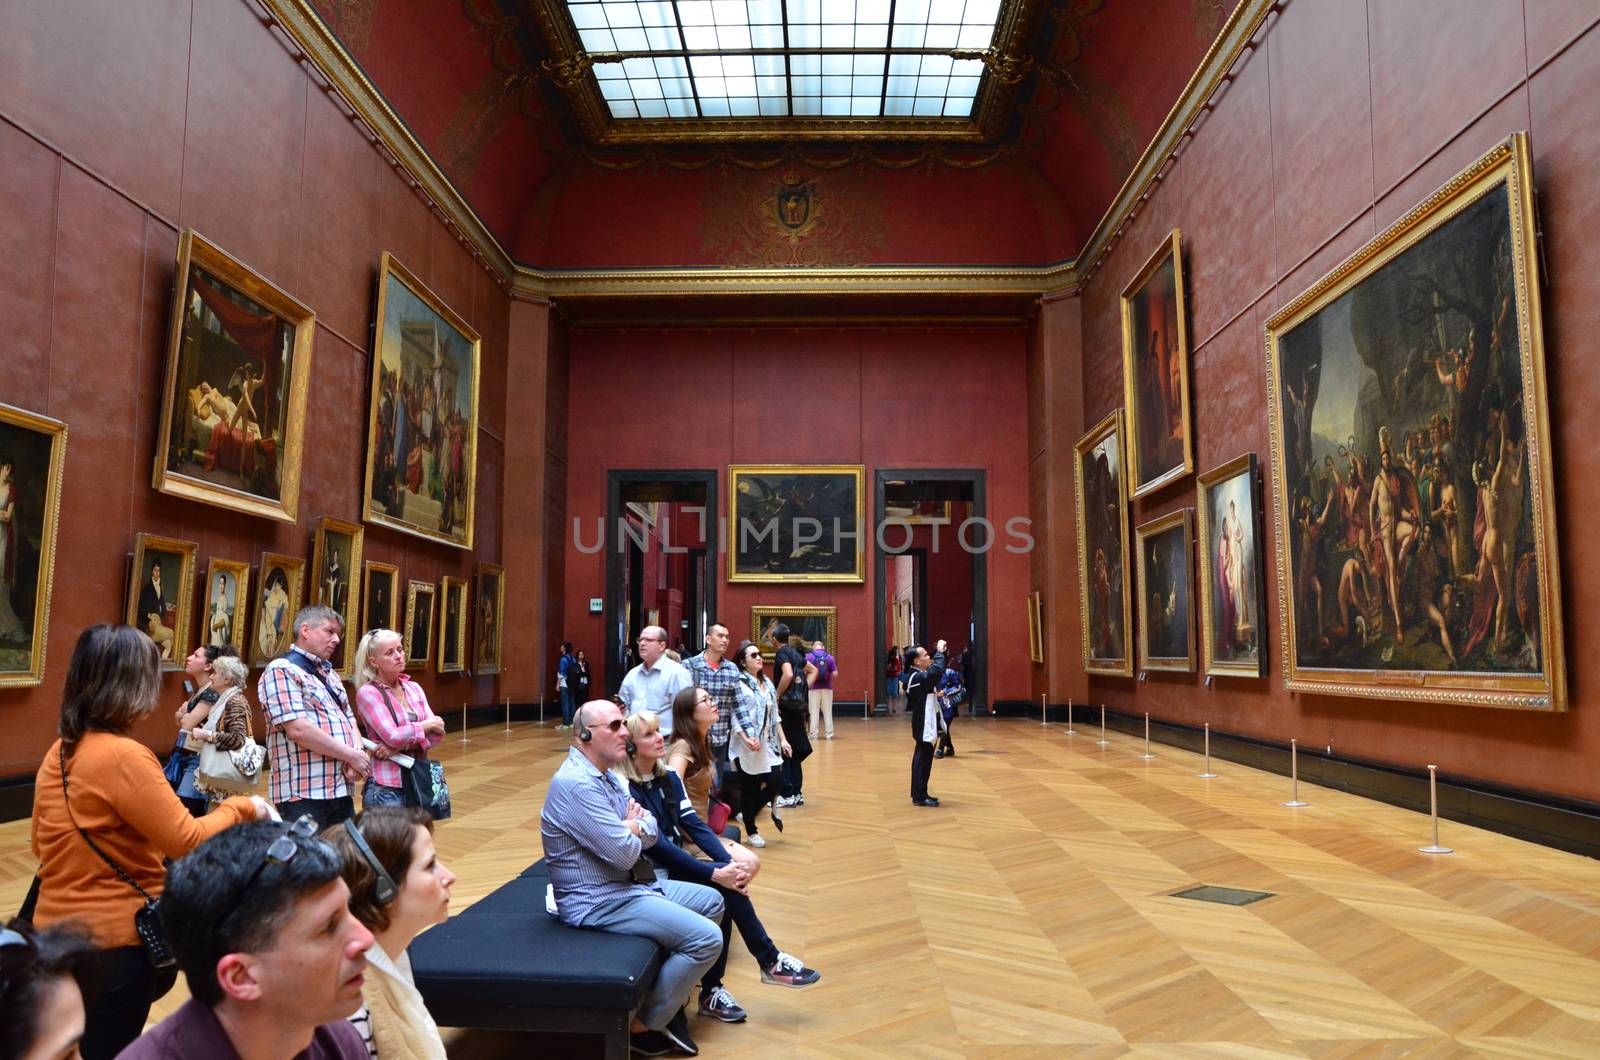 Paris, France - May 13, 2015: Visitors visit Rubens paintings in Louvre Museum by siraanamwong